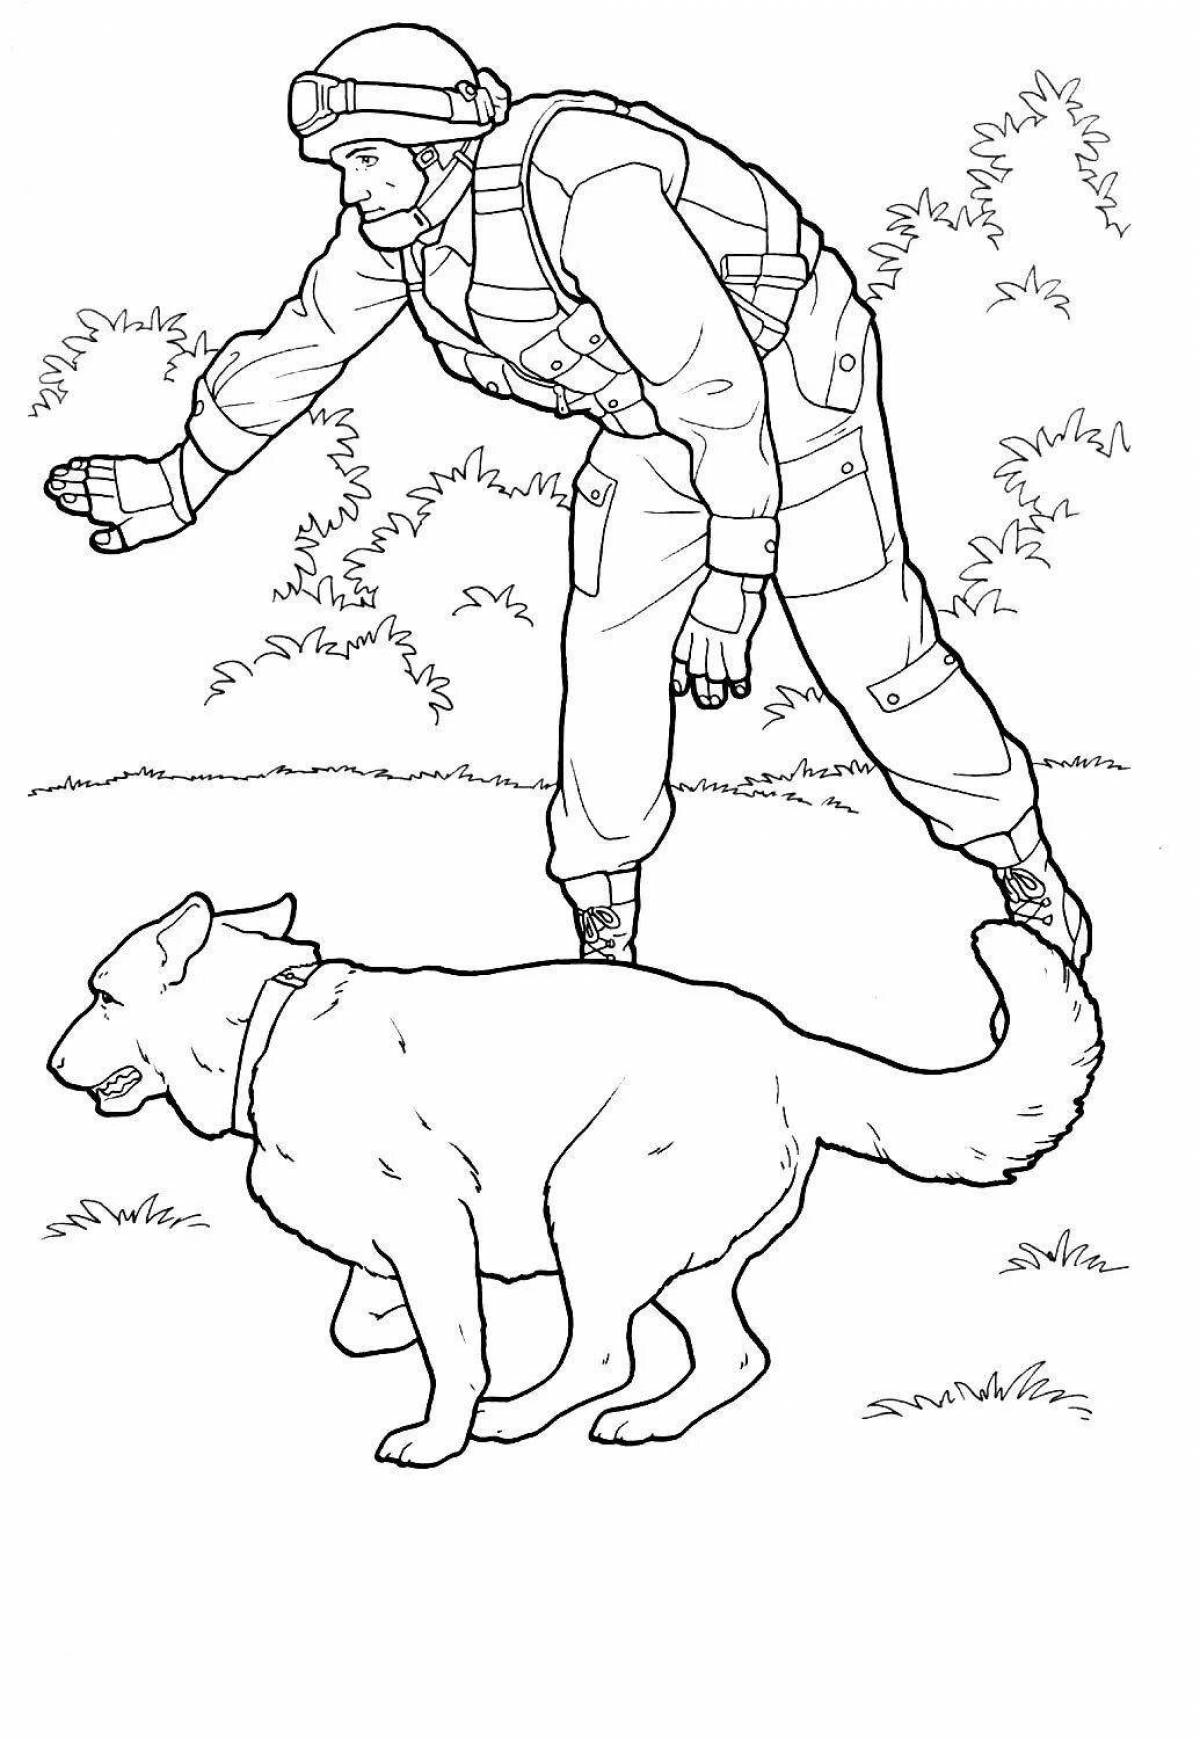 Cute soldier with dog coloring book